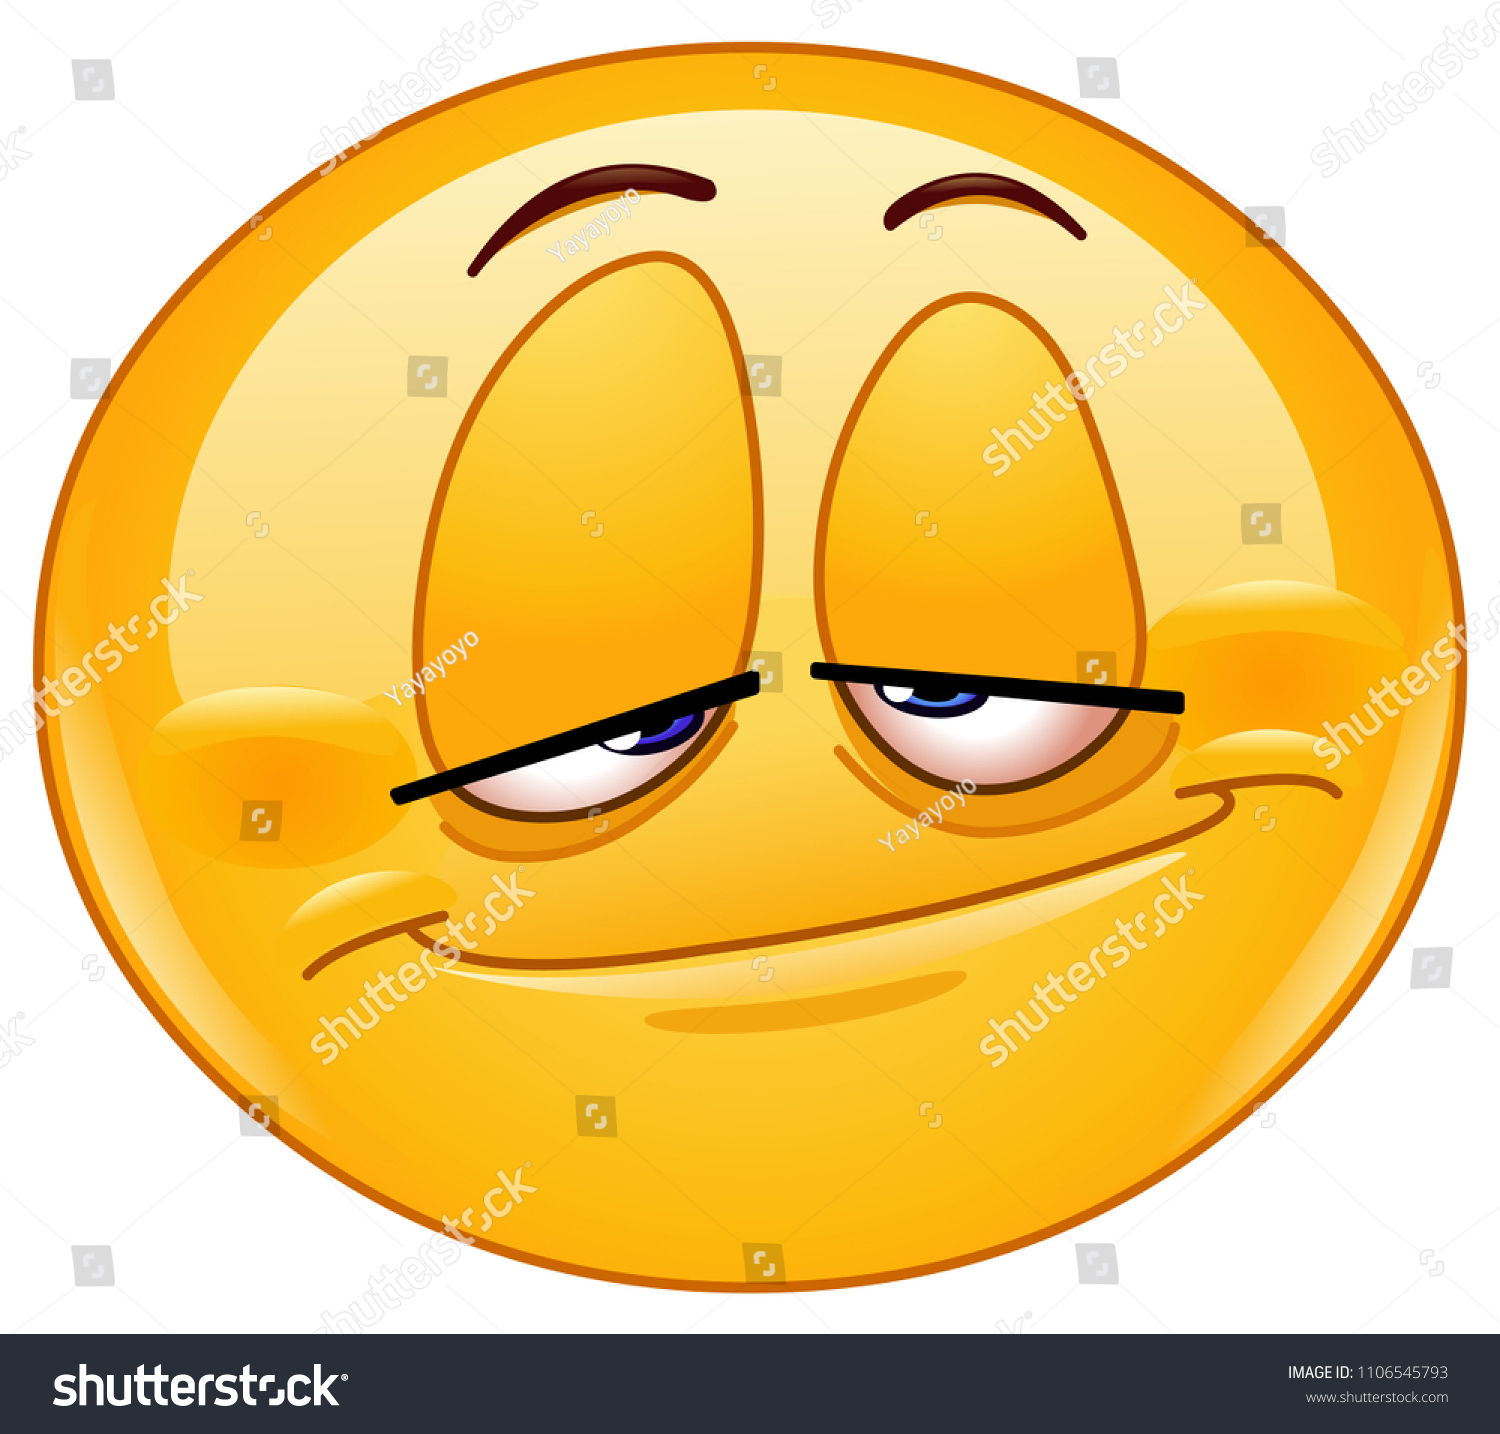 stock-vector-emoticon-with-a-stoned-look-1106545793.jpg